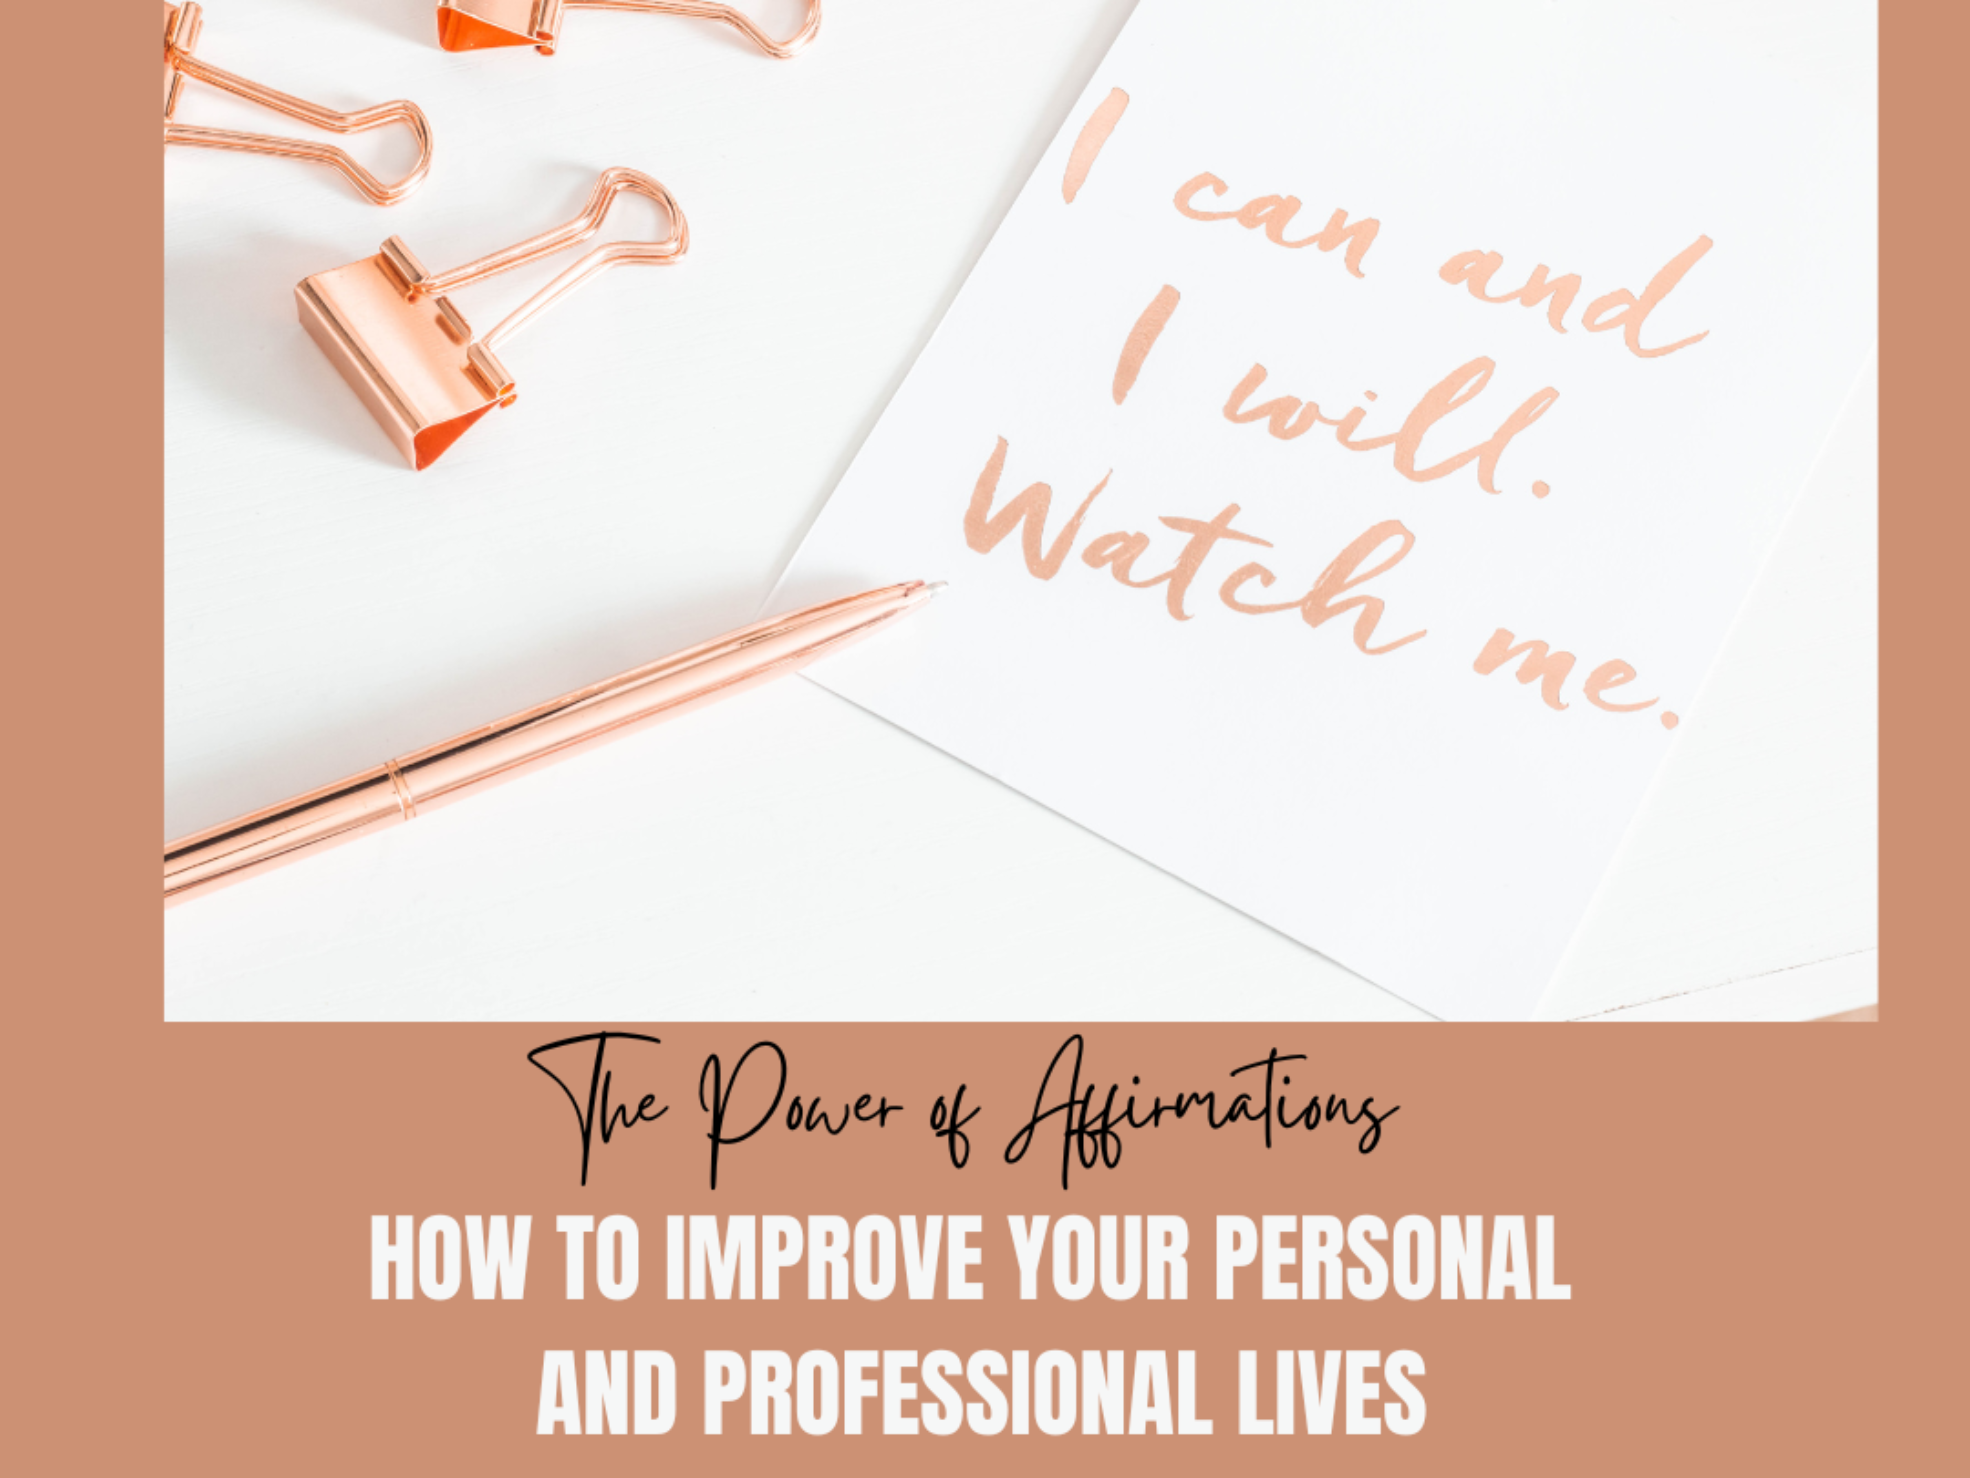 How to Improve Your Personal and Professional Lives